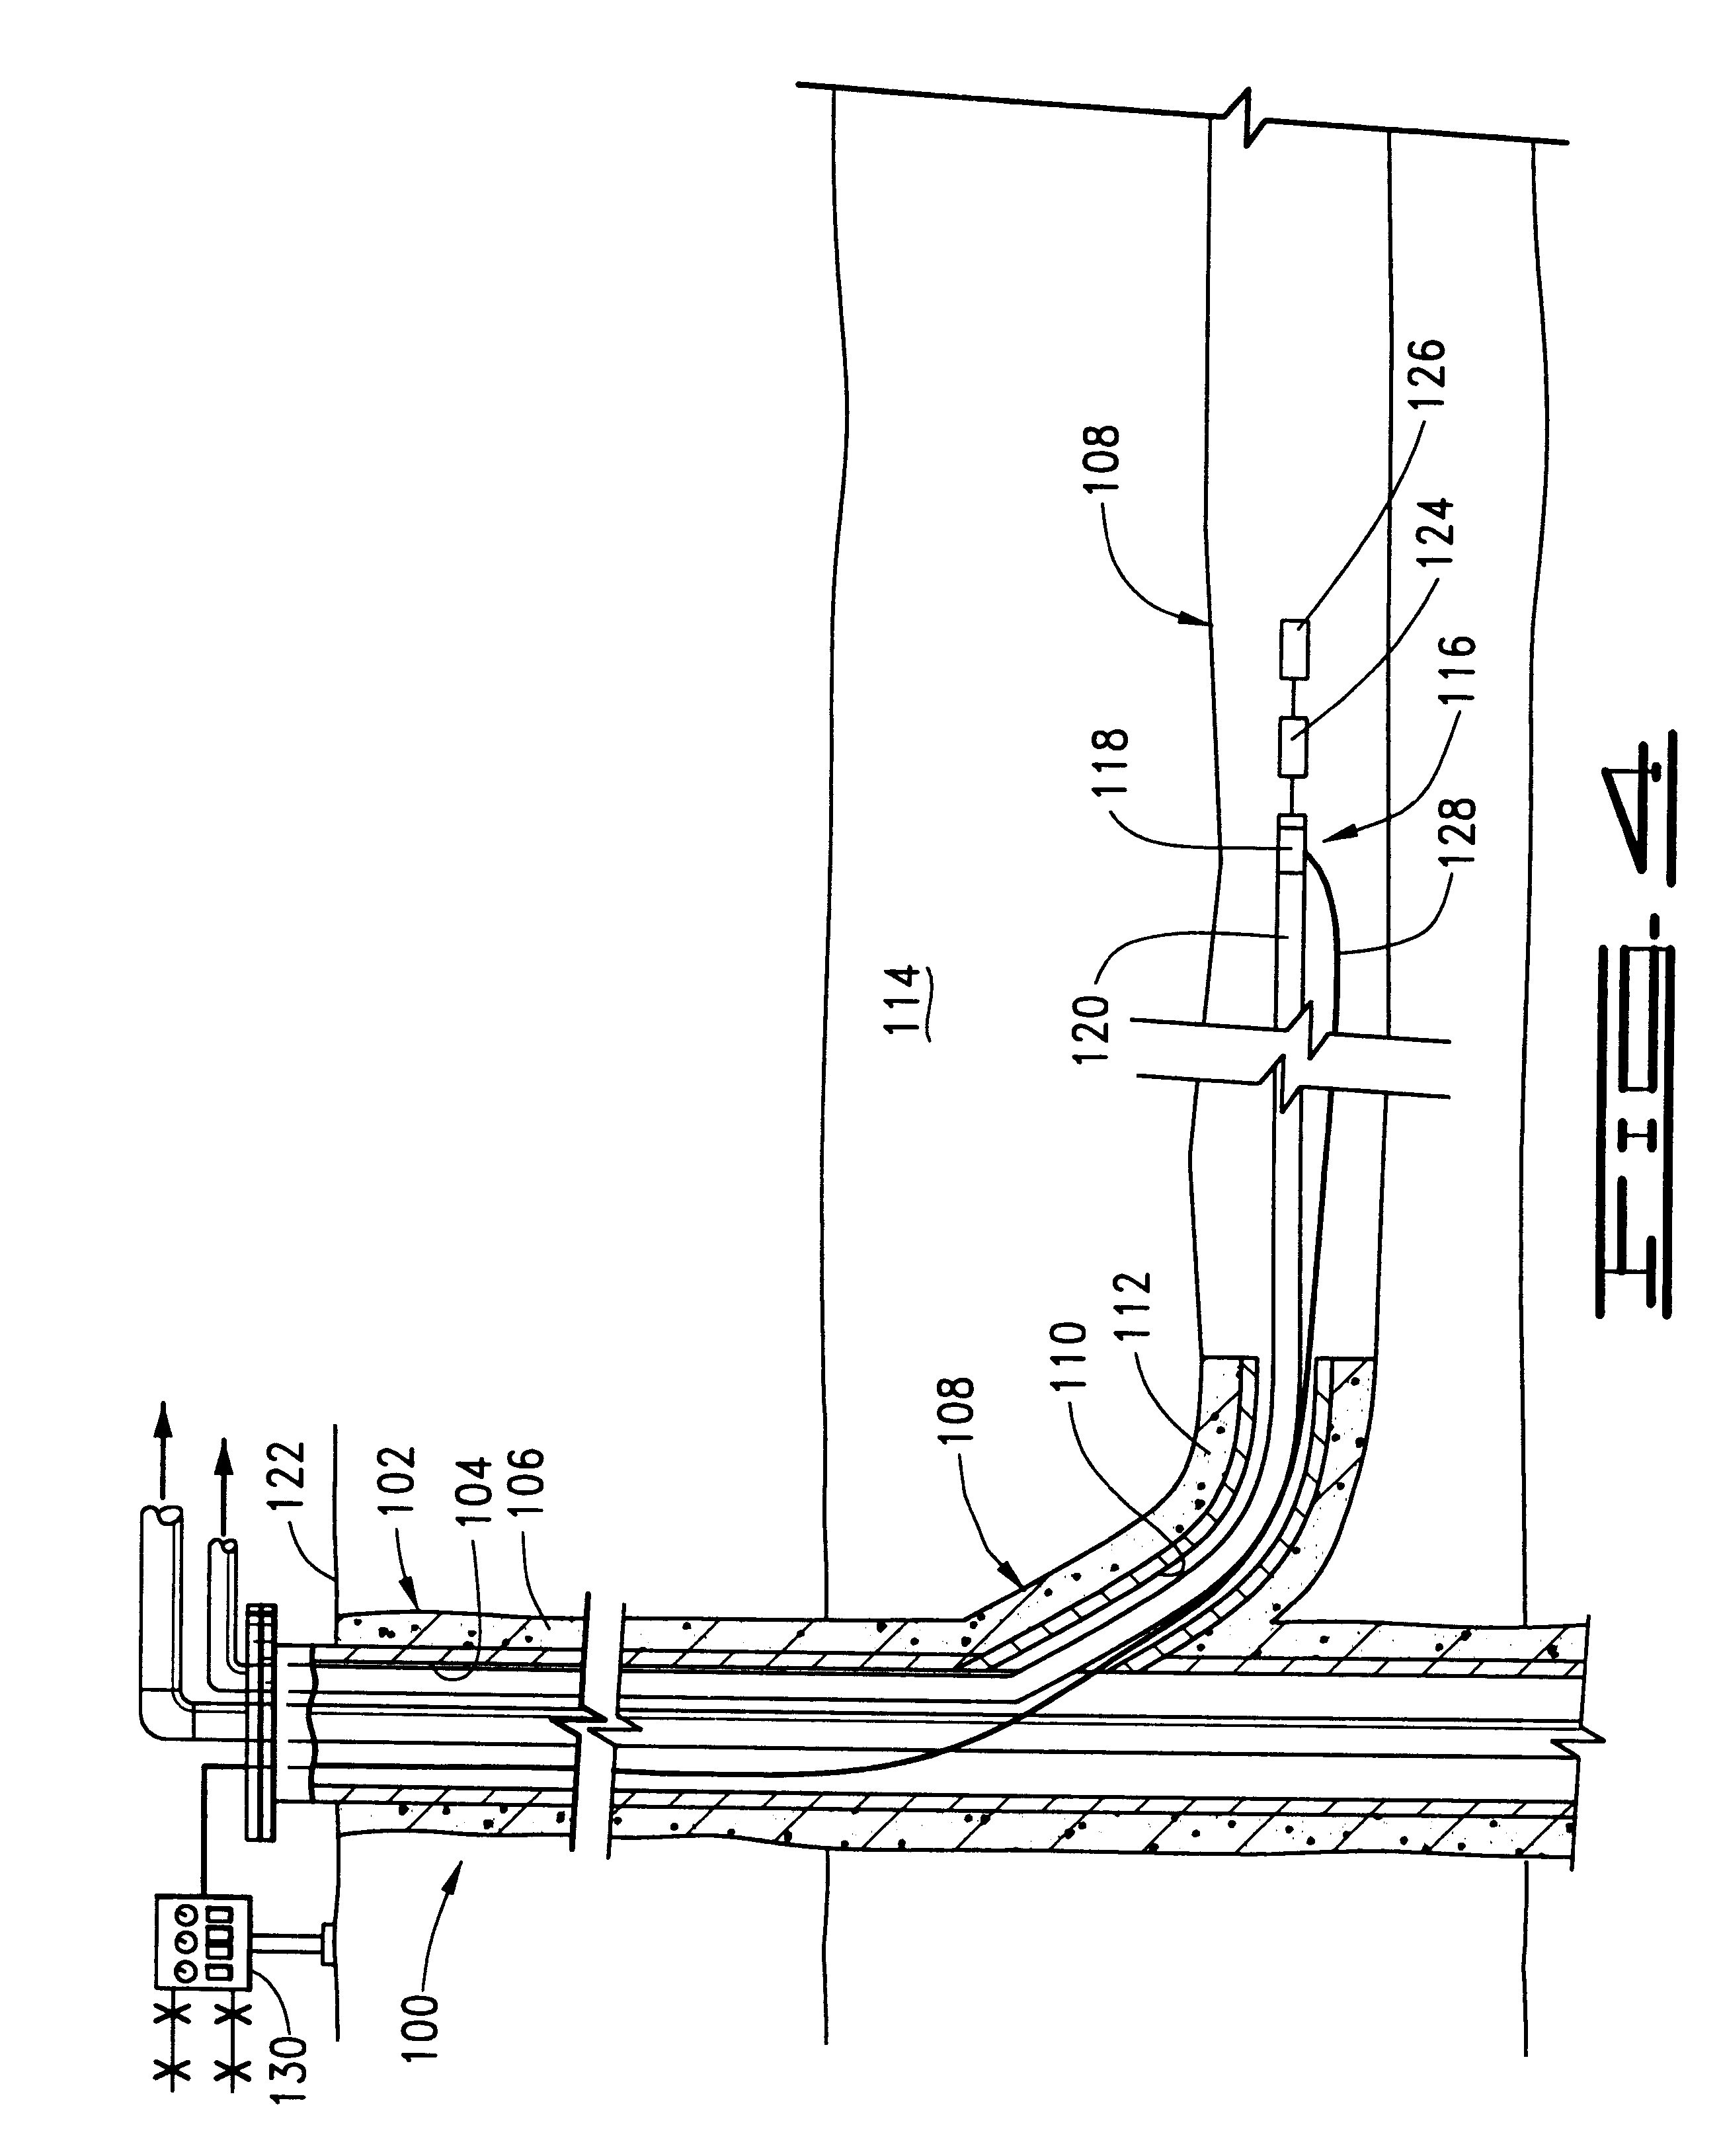 Methods and apparatus for enhancing well production using sonic energy